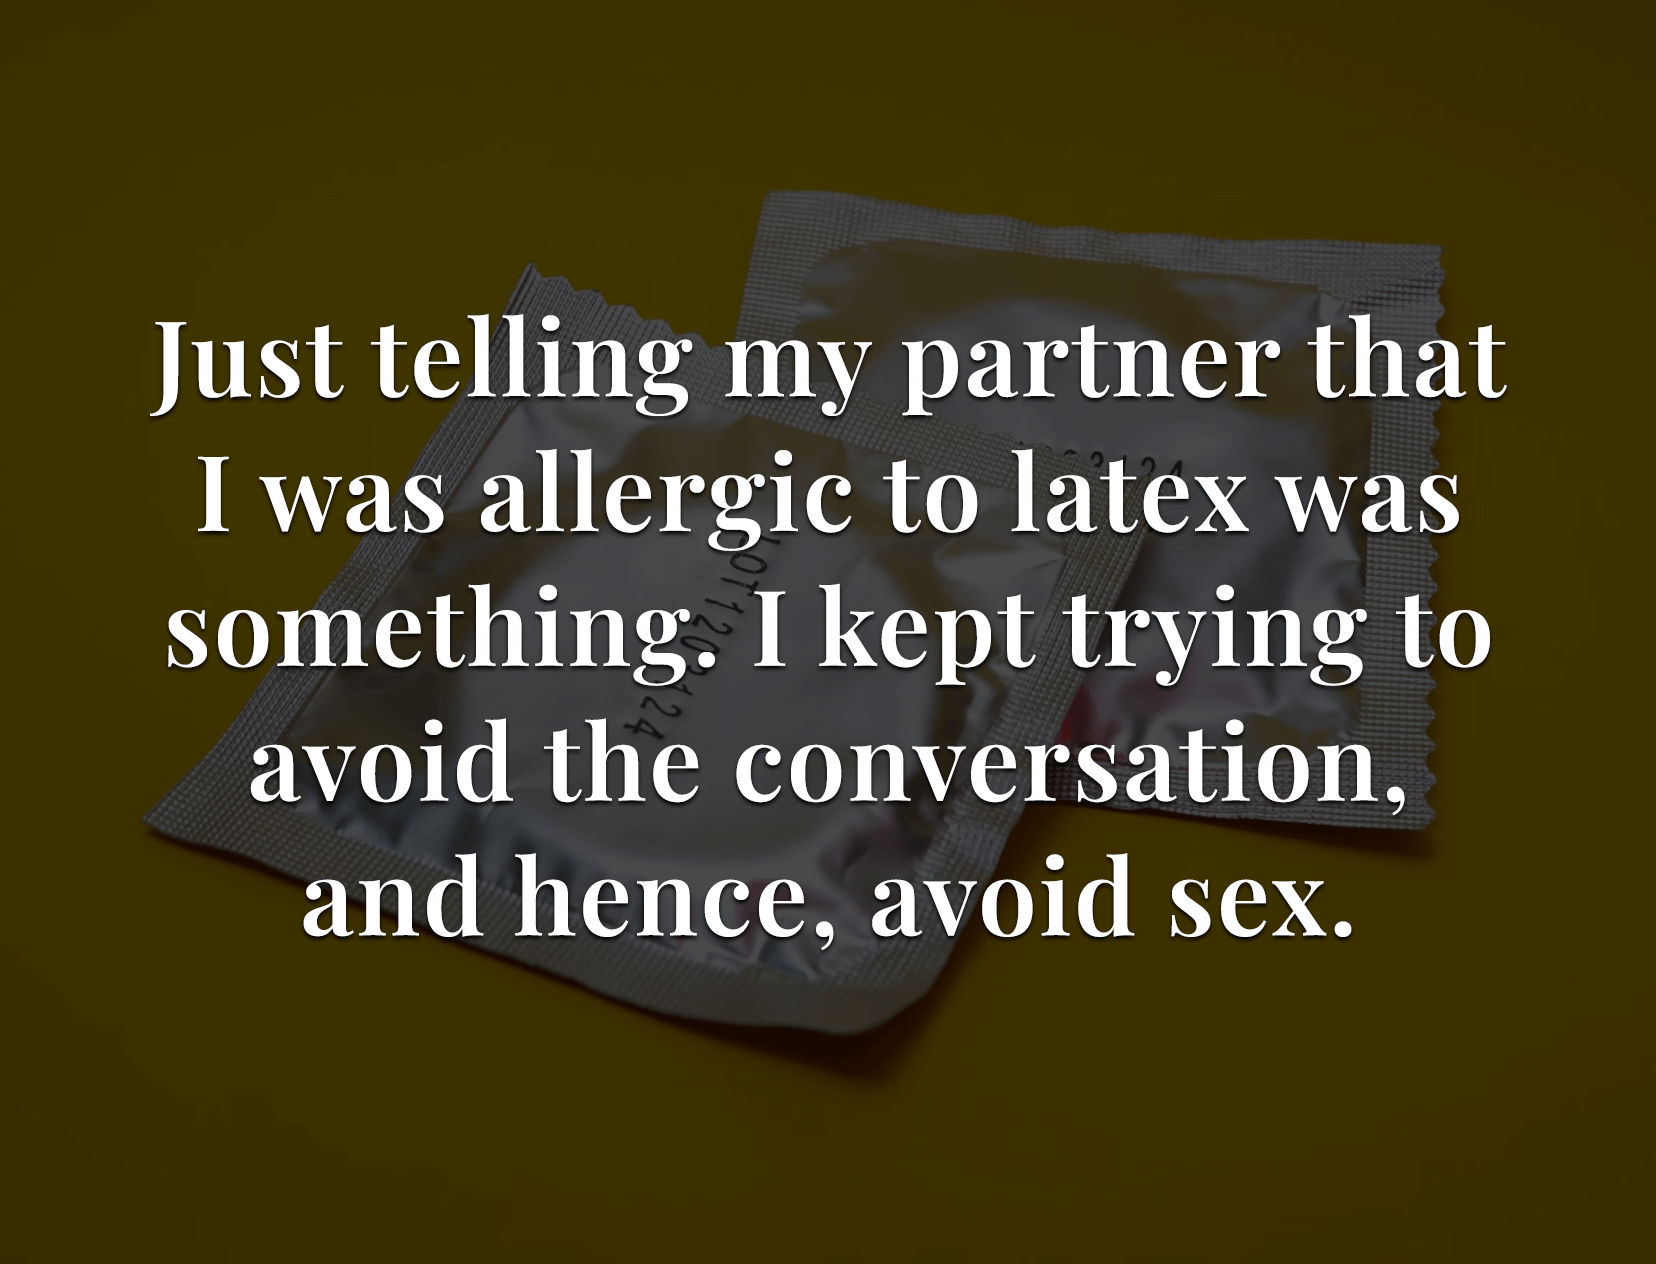 Women Discuss Sexual Problems They Can’t Share With Their Partners &amp; This Is Lot To Think About